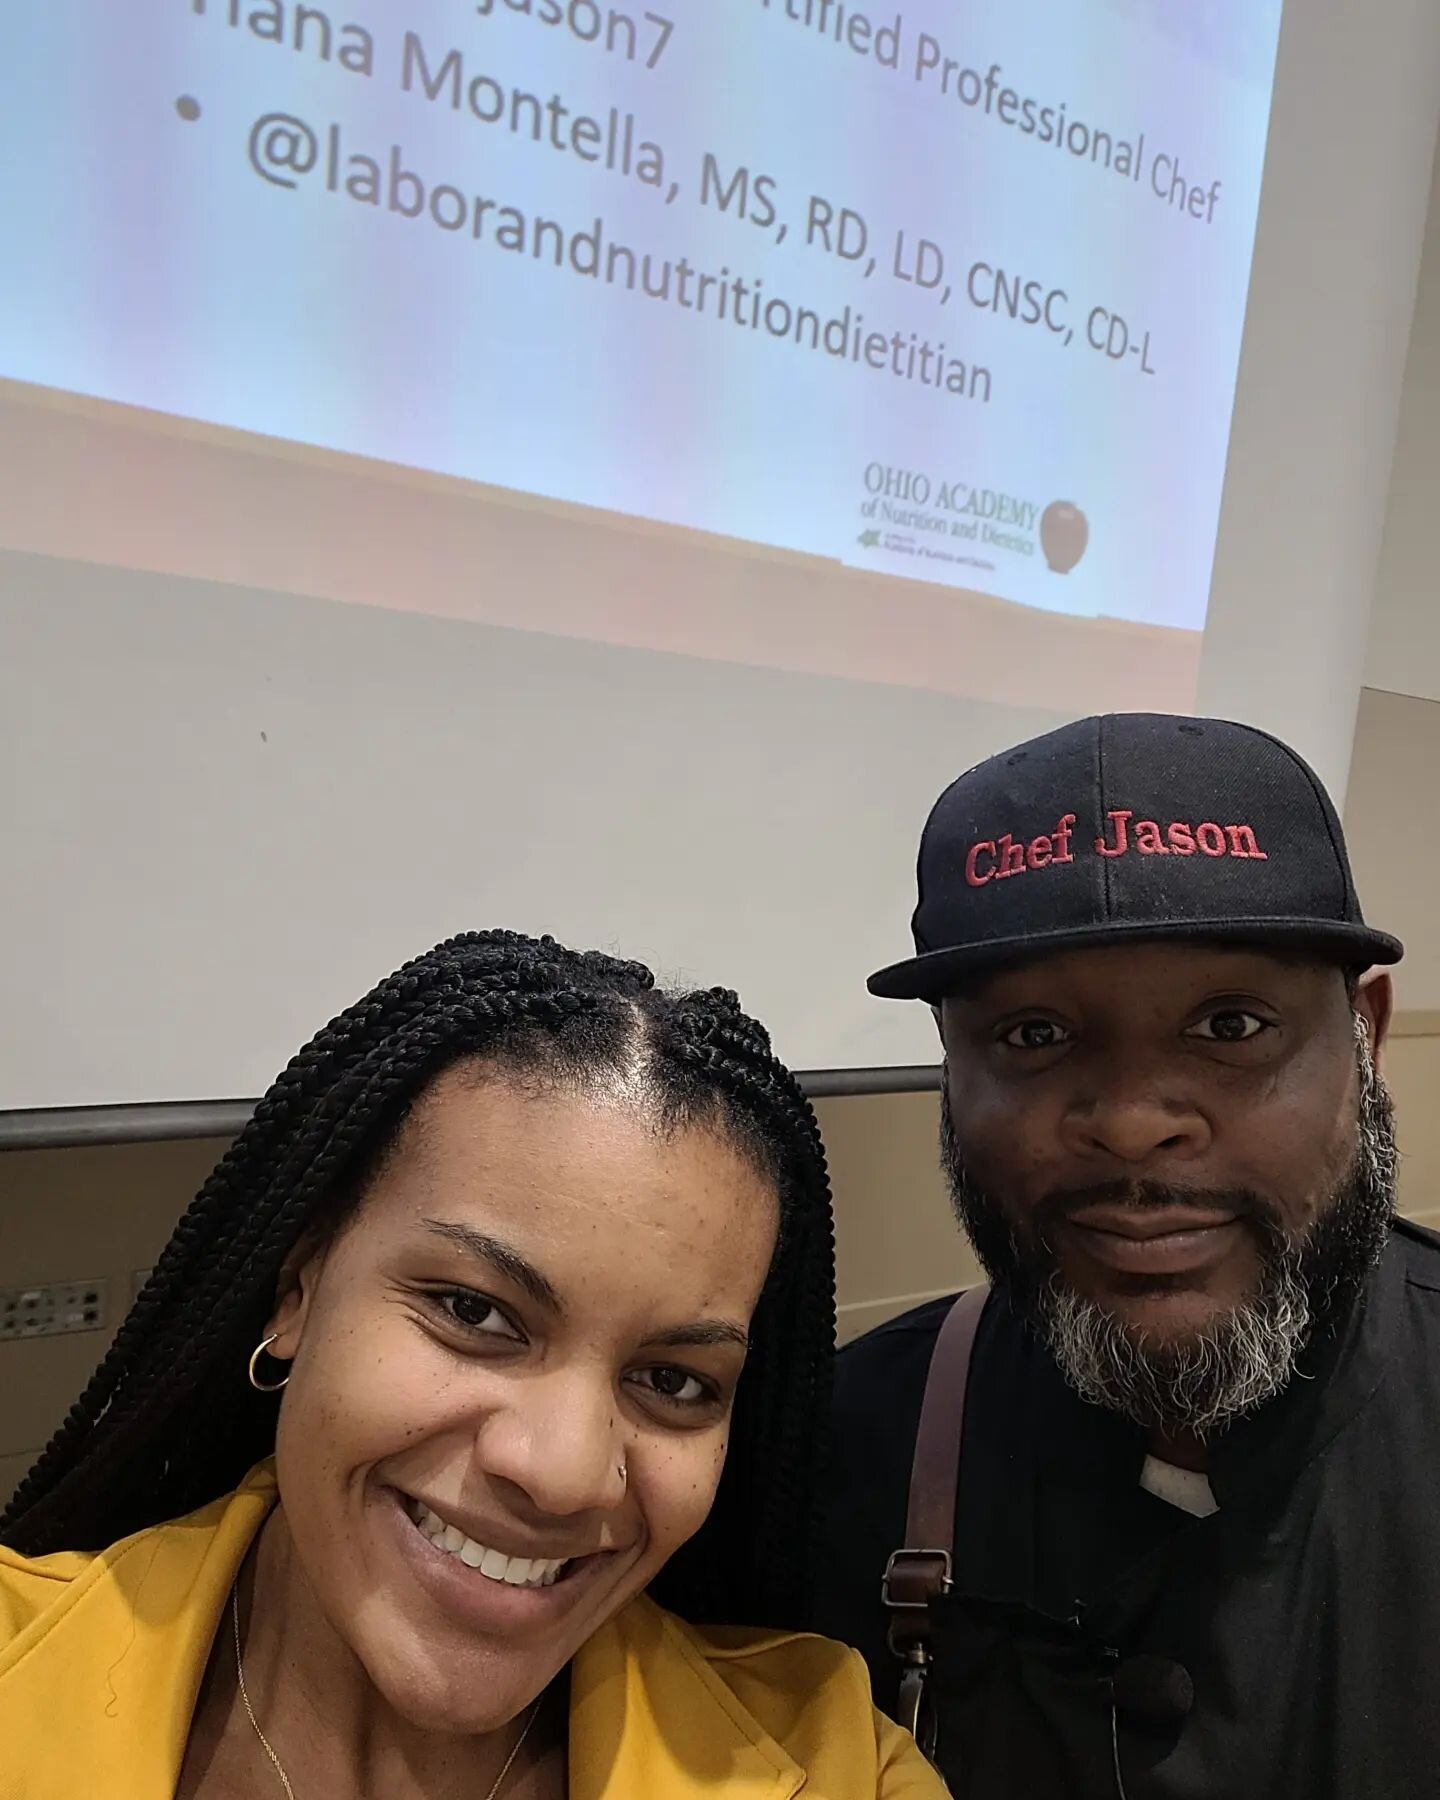 Just presented at @eatrightohio 2021 Conference with @chefjason7. We going on tour!

#culturalcompetency #nutrition #cheflife #douladietitiandivas